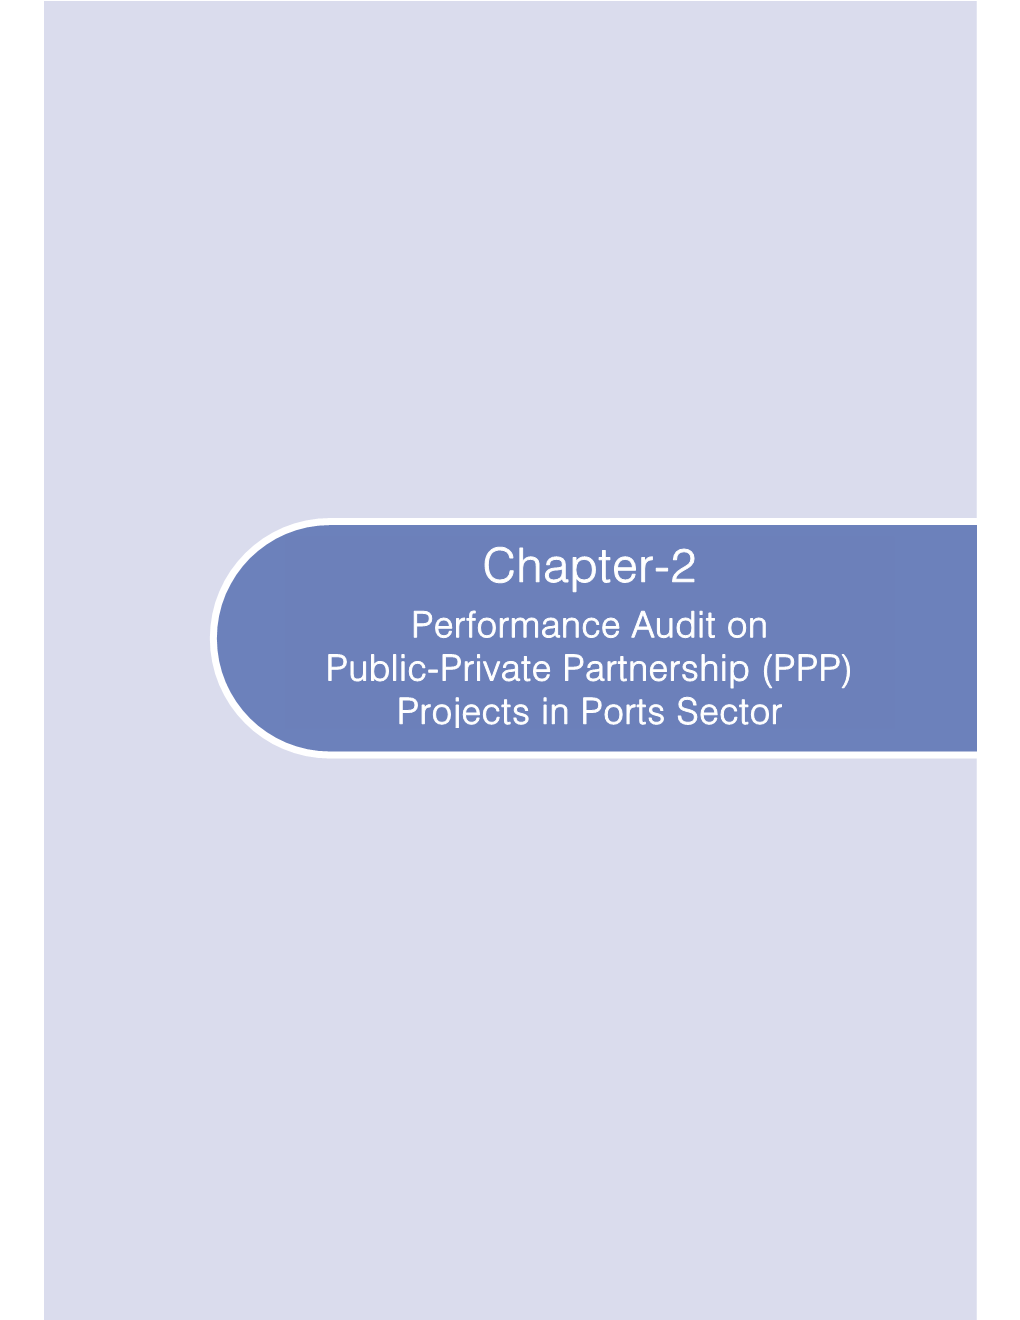 Chapter-2 Performance Audit on Public-Private Partnership (PPP) Projects in Ports Sector